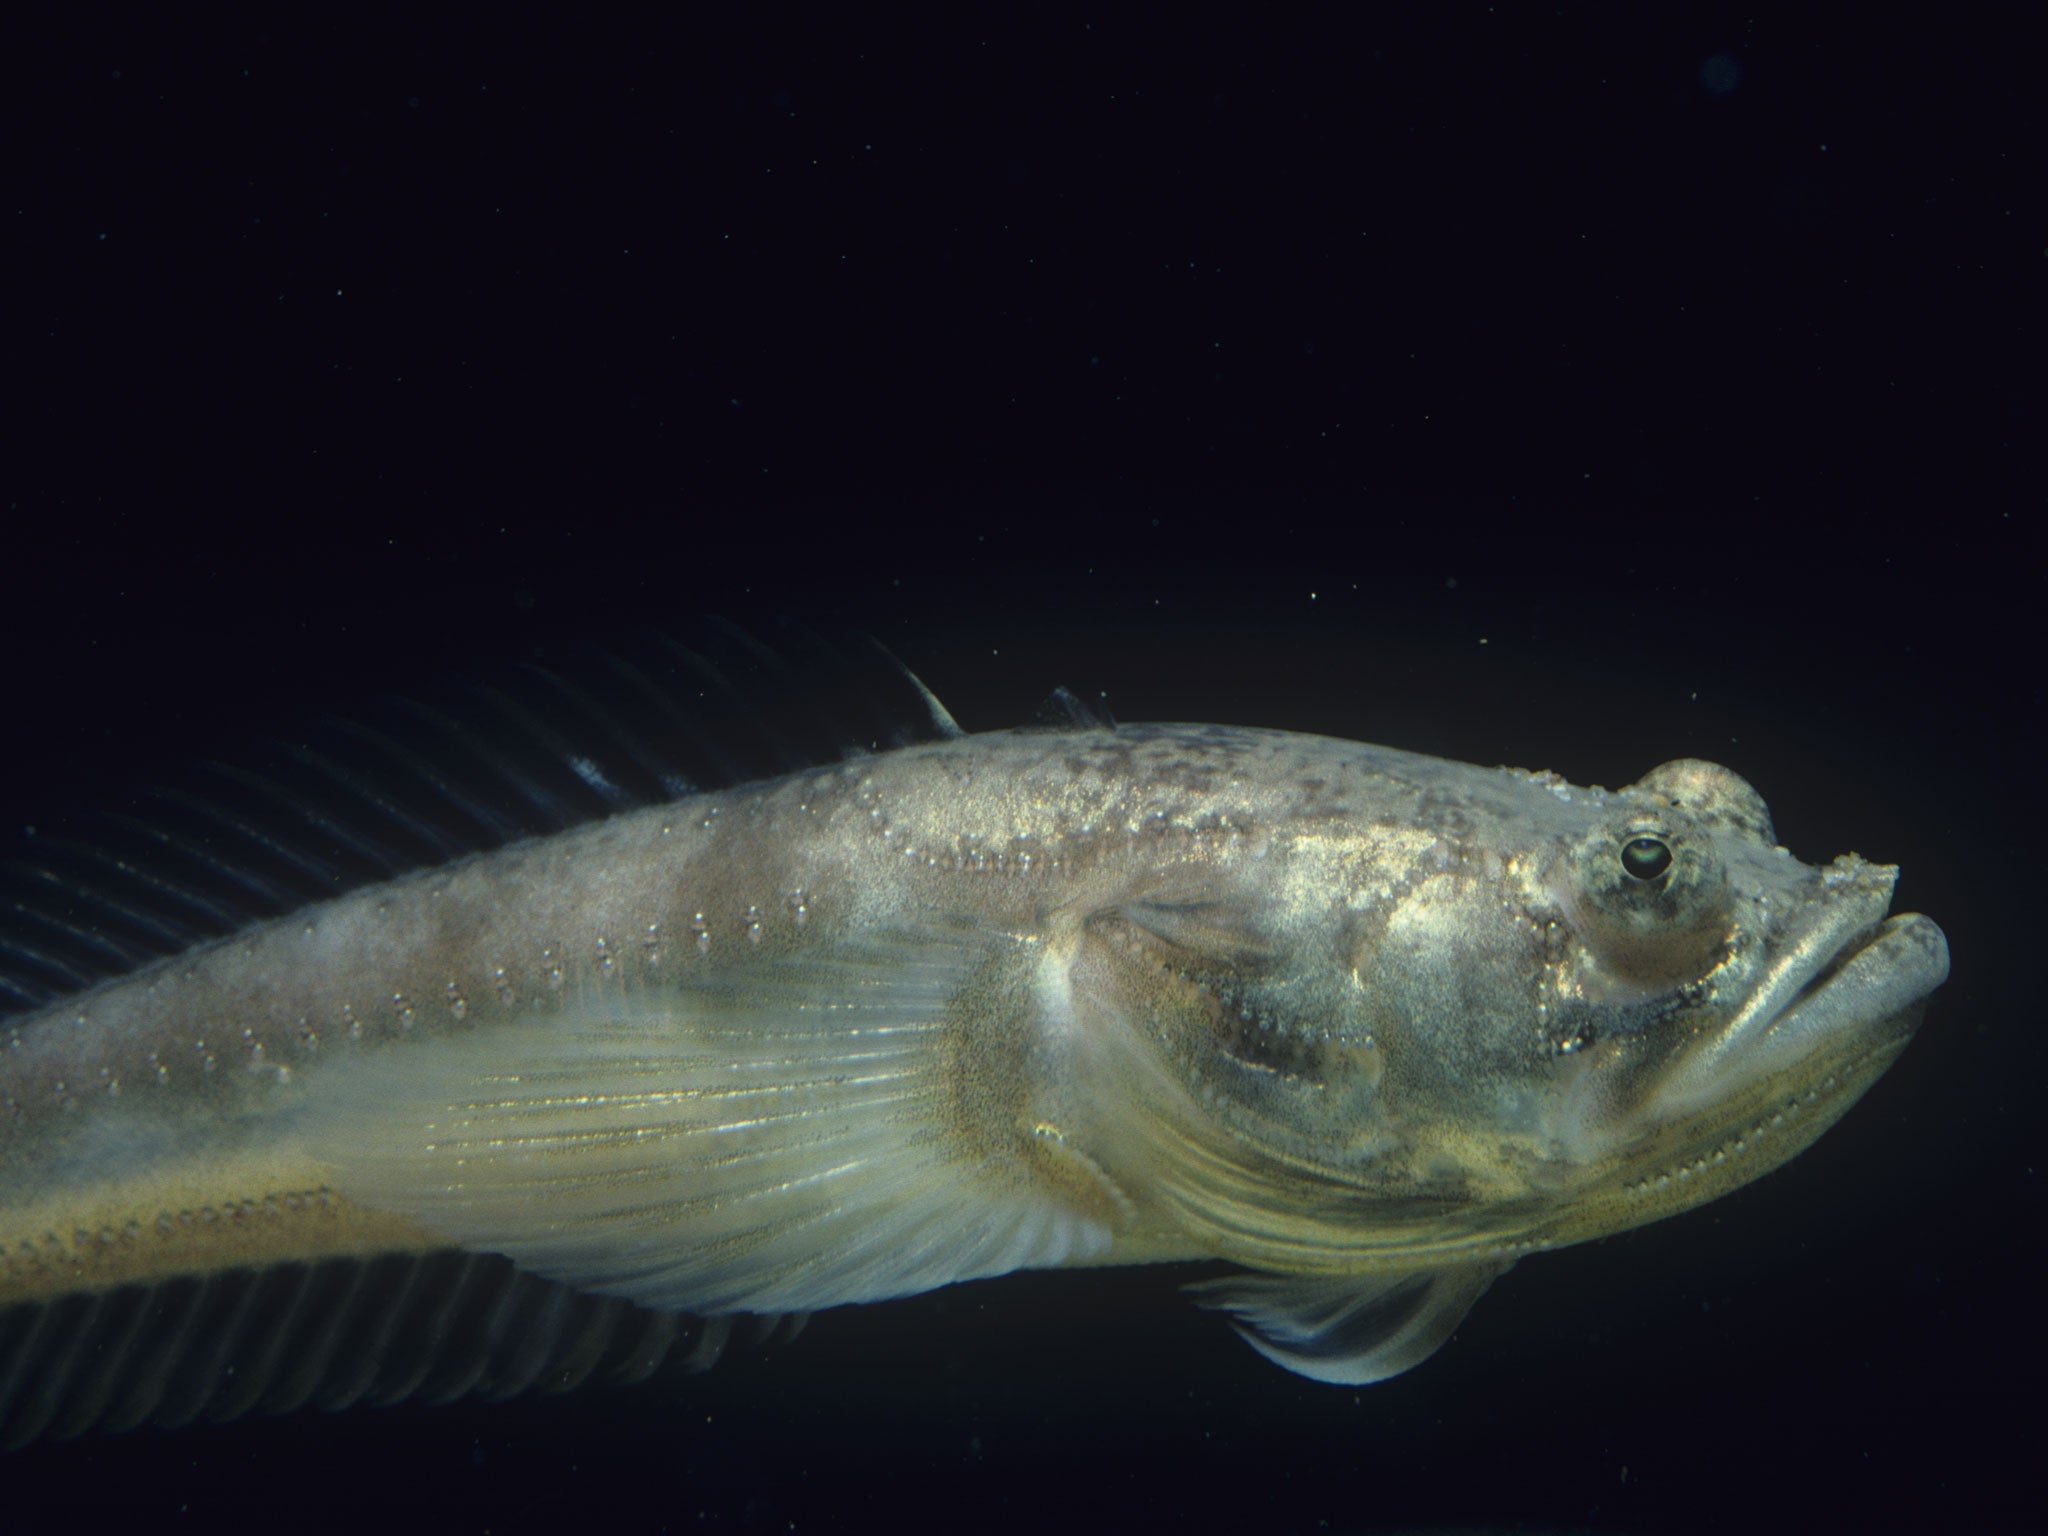 The Midshipman fish, which has been blamed for keeping people up all night with its mating rituals